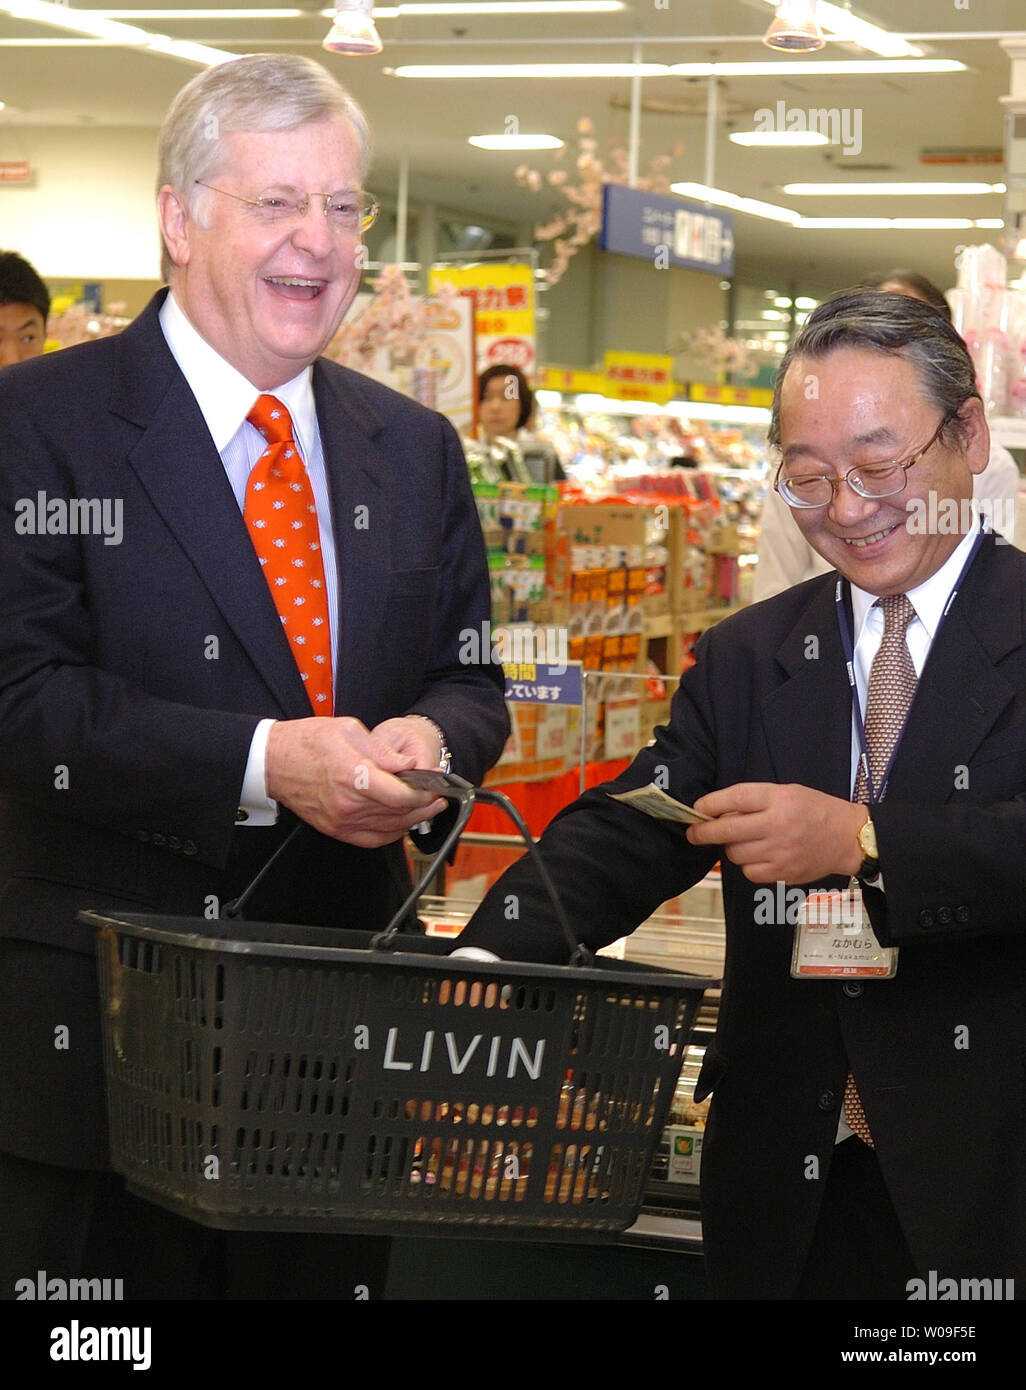 spike/acg   Unidentified man is in focus, Ambassador is soft    John Thomas Schieffer (L), U.S. Ambassador to Japan, buys some of the products at a supermarket in an effort to promote beef products in downtown Tokyo, Japan on March 29, 2007. (UPI Photo/Keizo Mori) Stock Photo